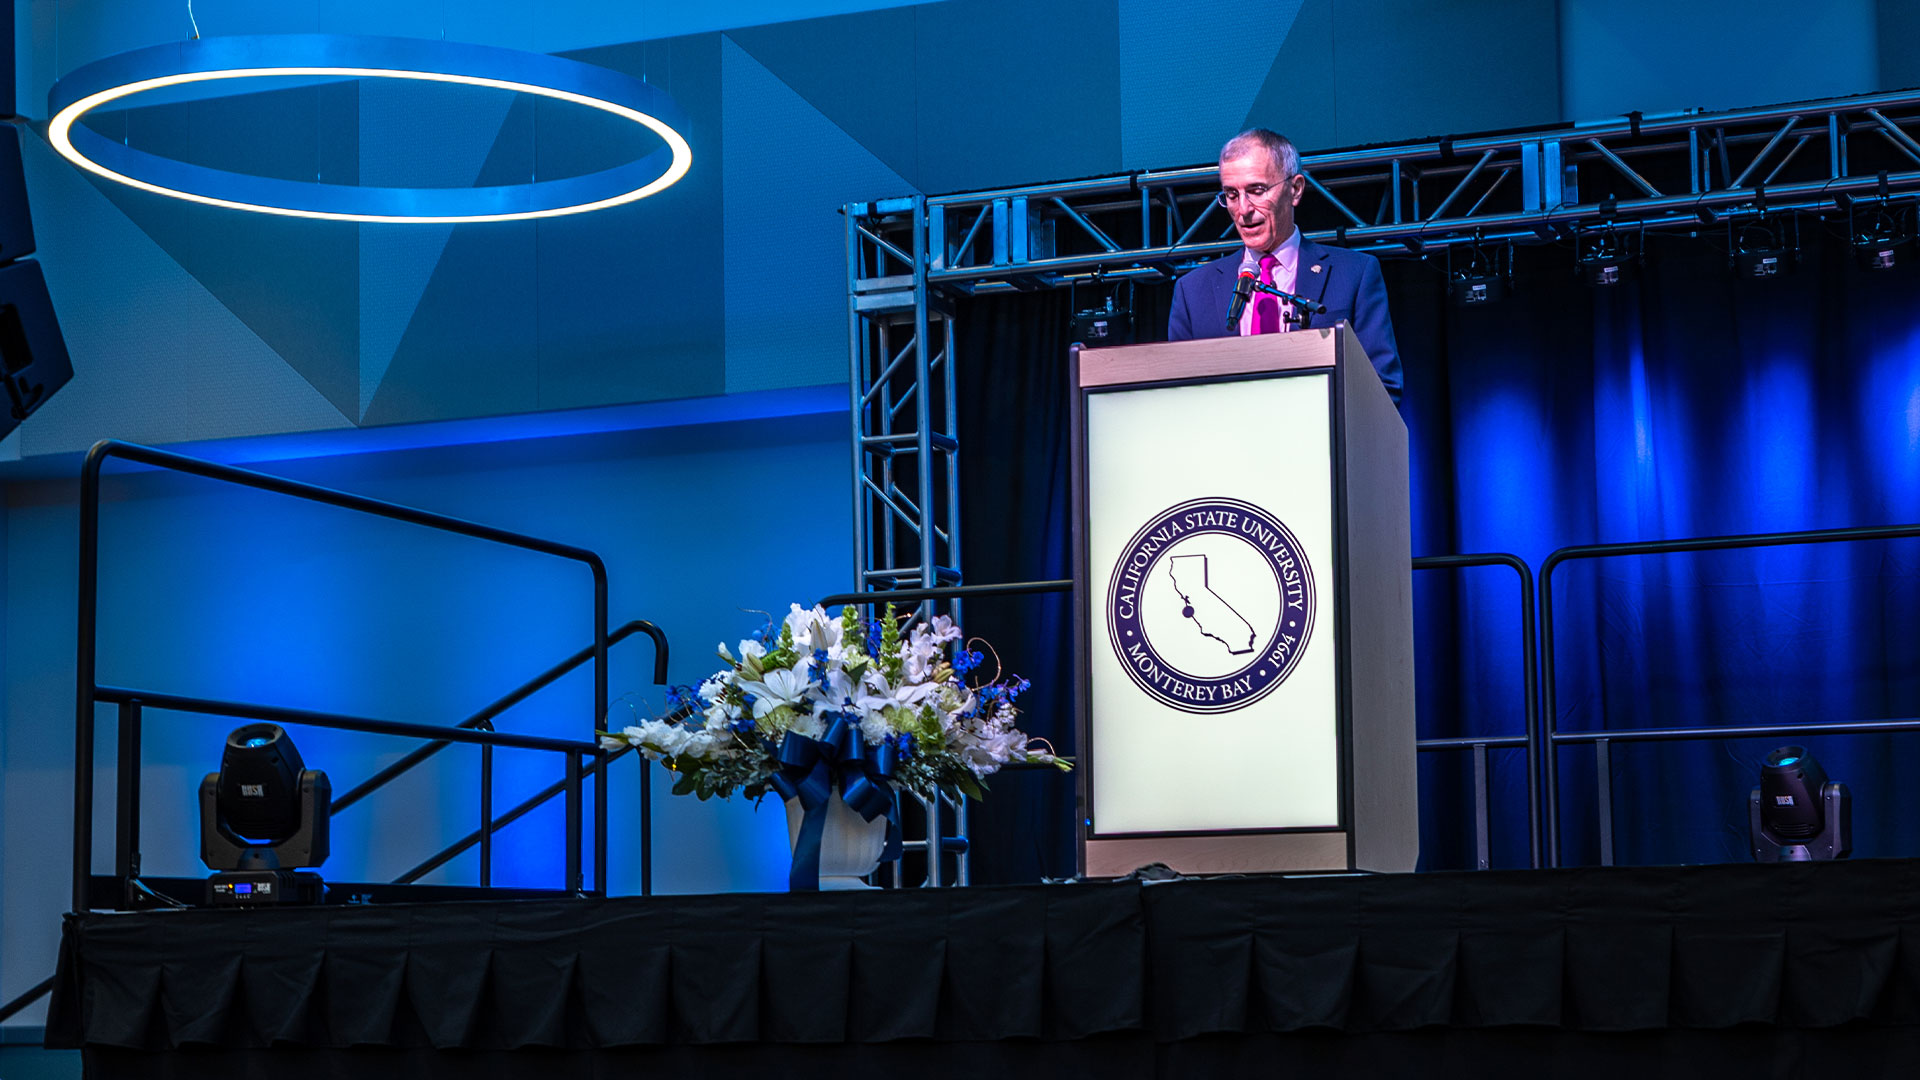 Photo: President Ochoa speaking at a podium during Day of Welcome employee event